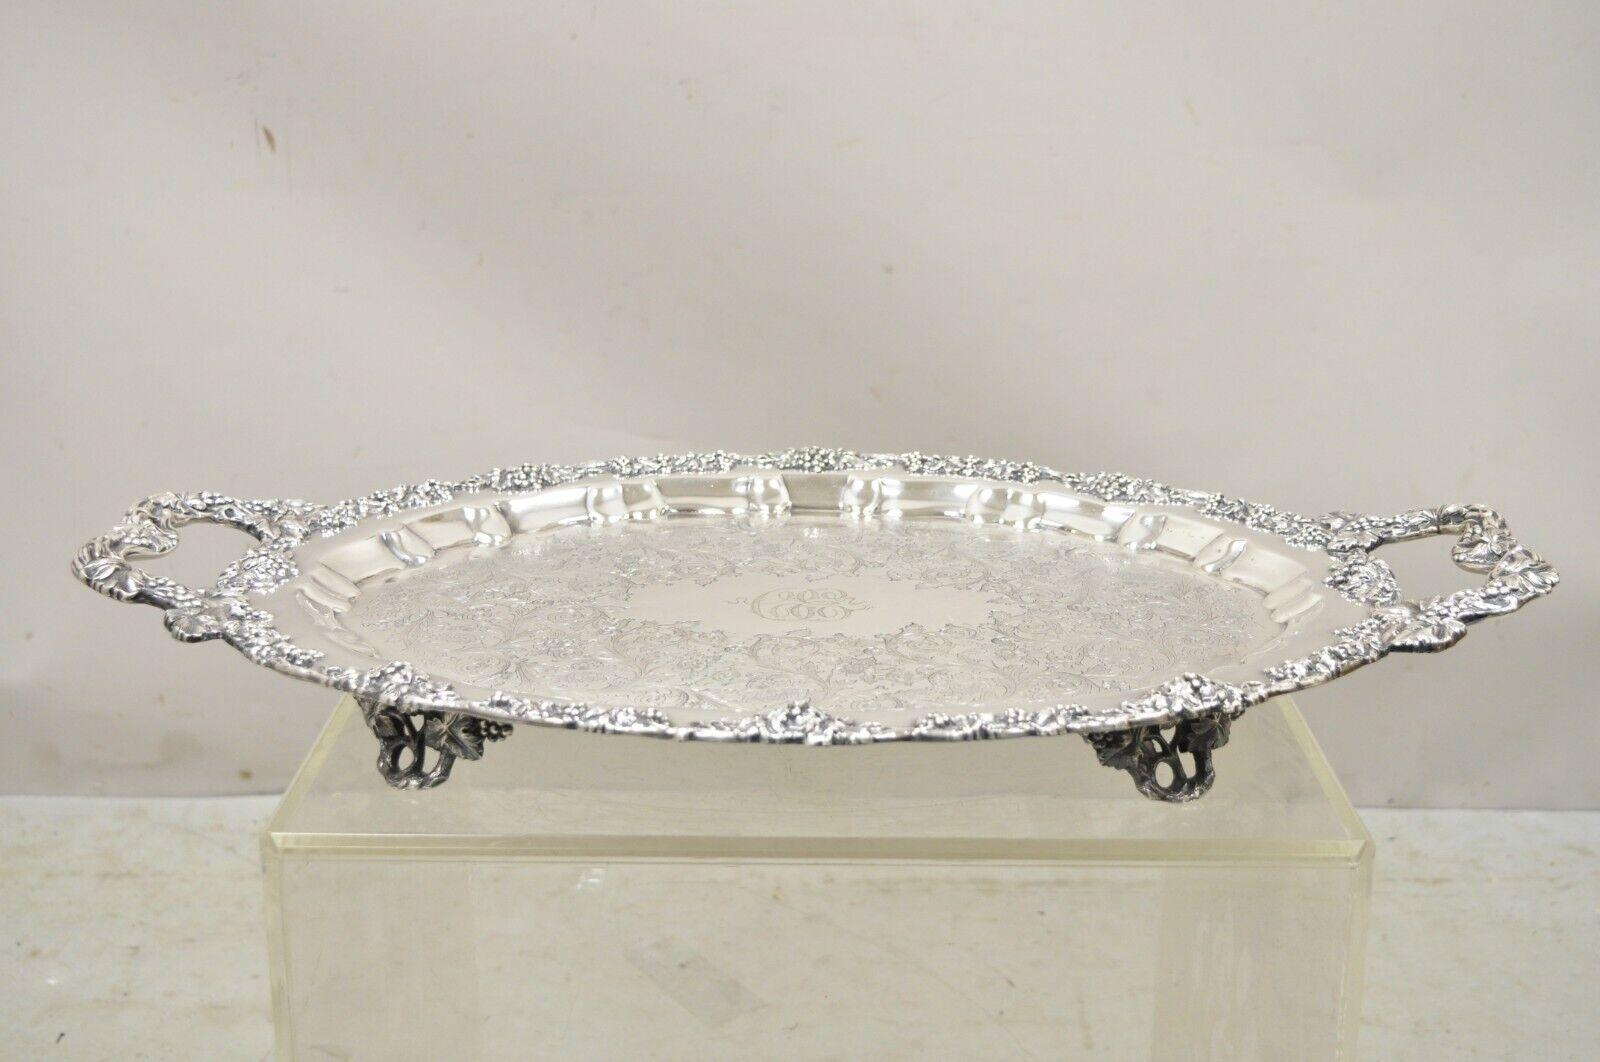 Antique English Victorian Silver Plated Ornate Grapevine Serving Platter Tray. Item features an engraved monogram to center, highly decorated throughout, ornate twin handles, raised on ornate feet, very nice antique item, quality craftsmanship,